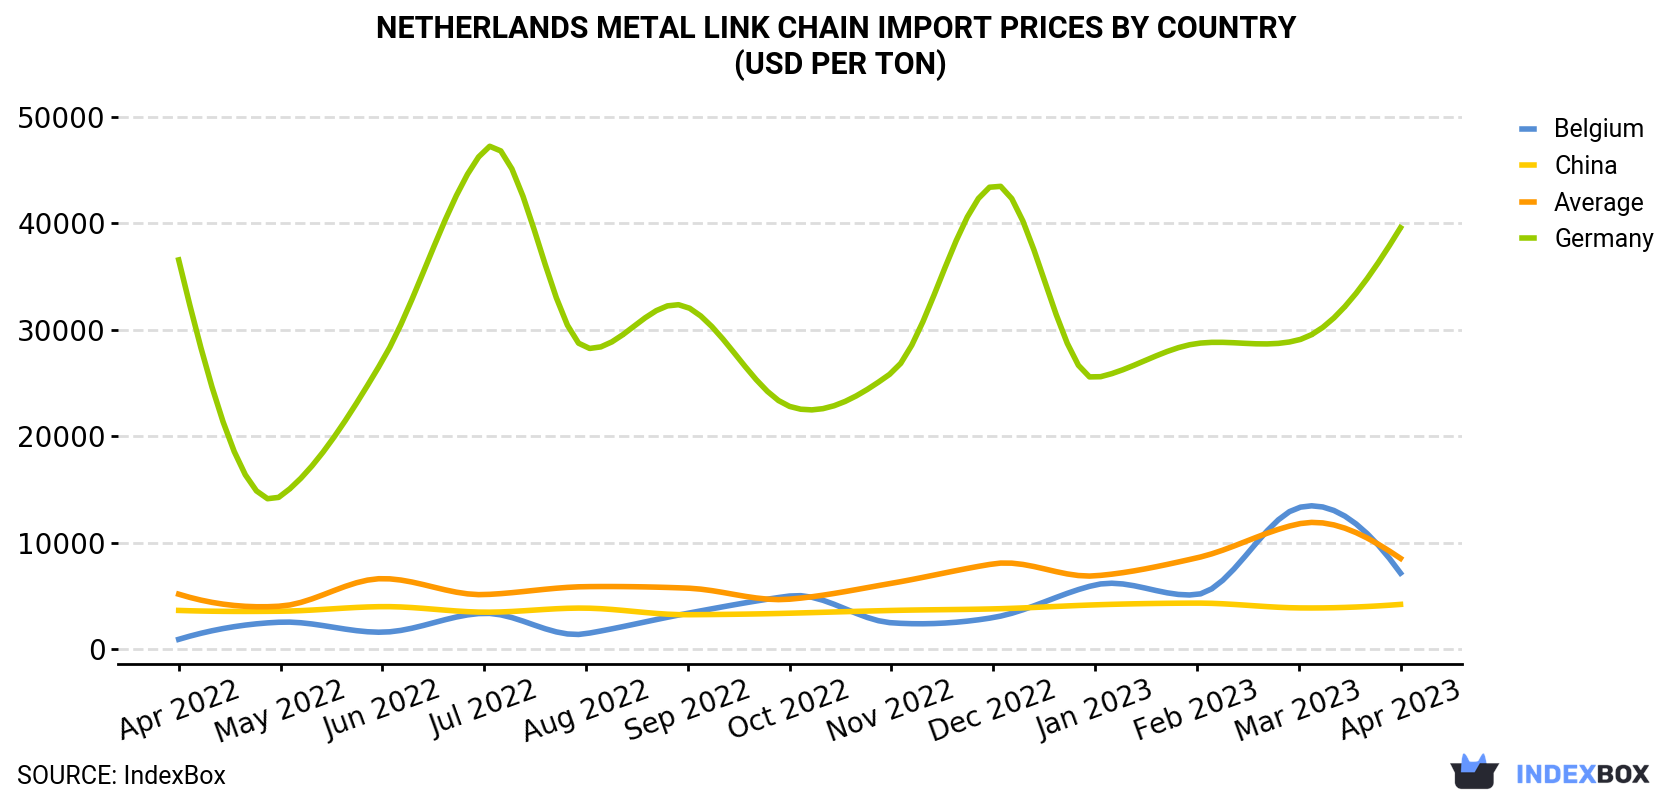 Netherlands Metal Link Chain Import Prices By Country (USD Per Ton)